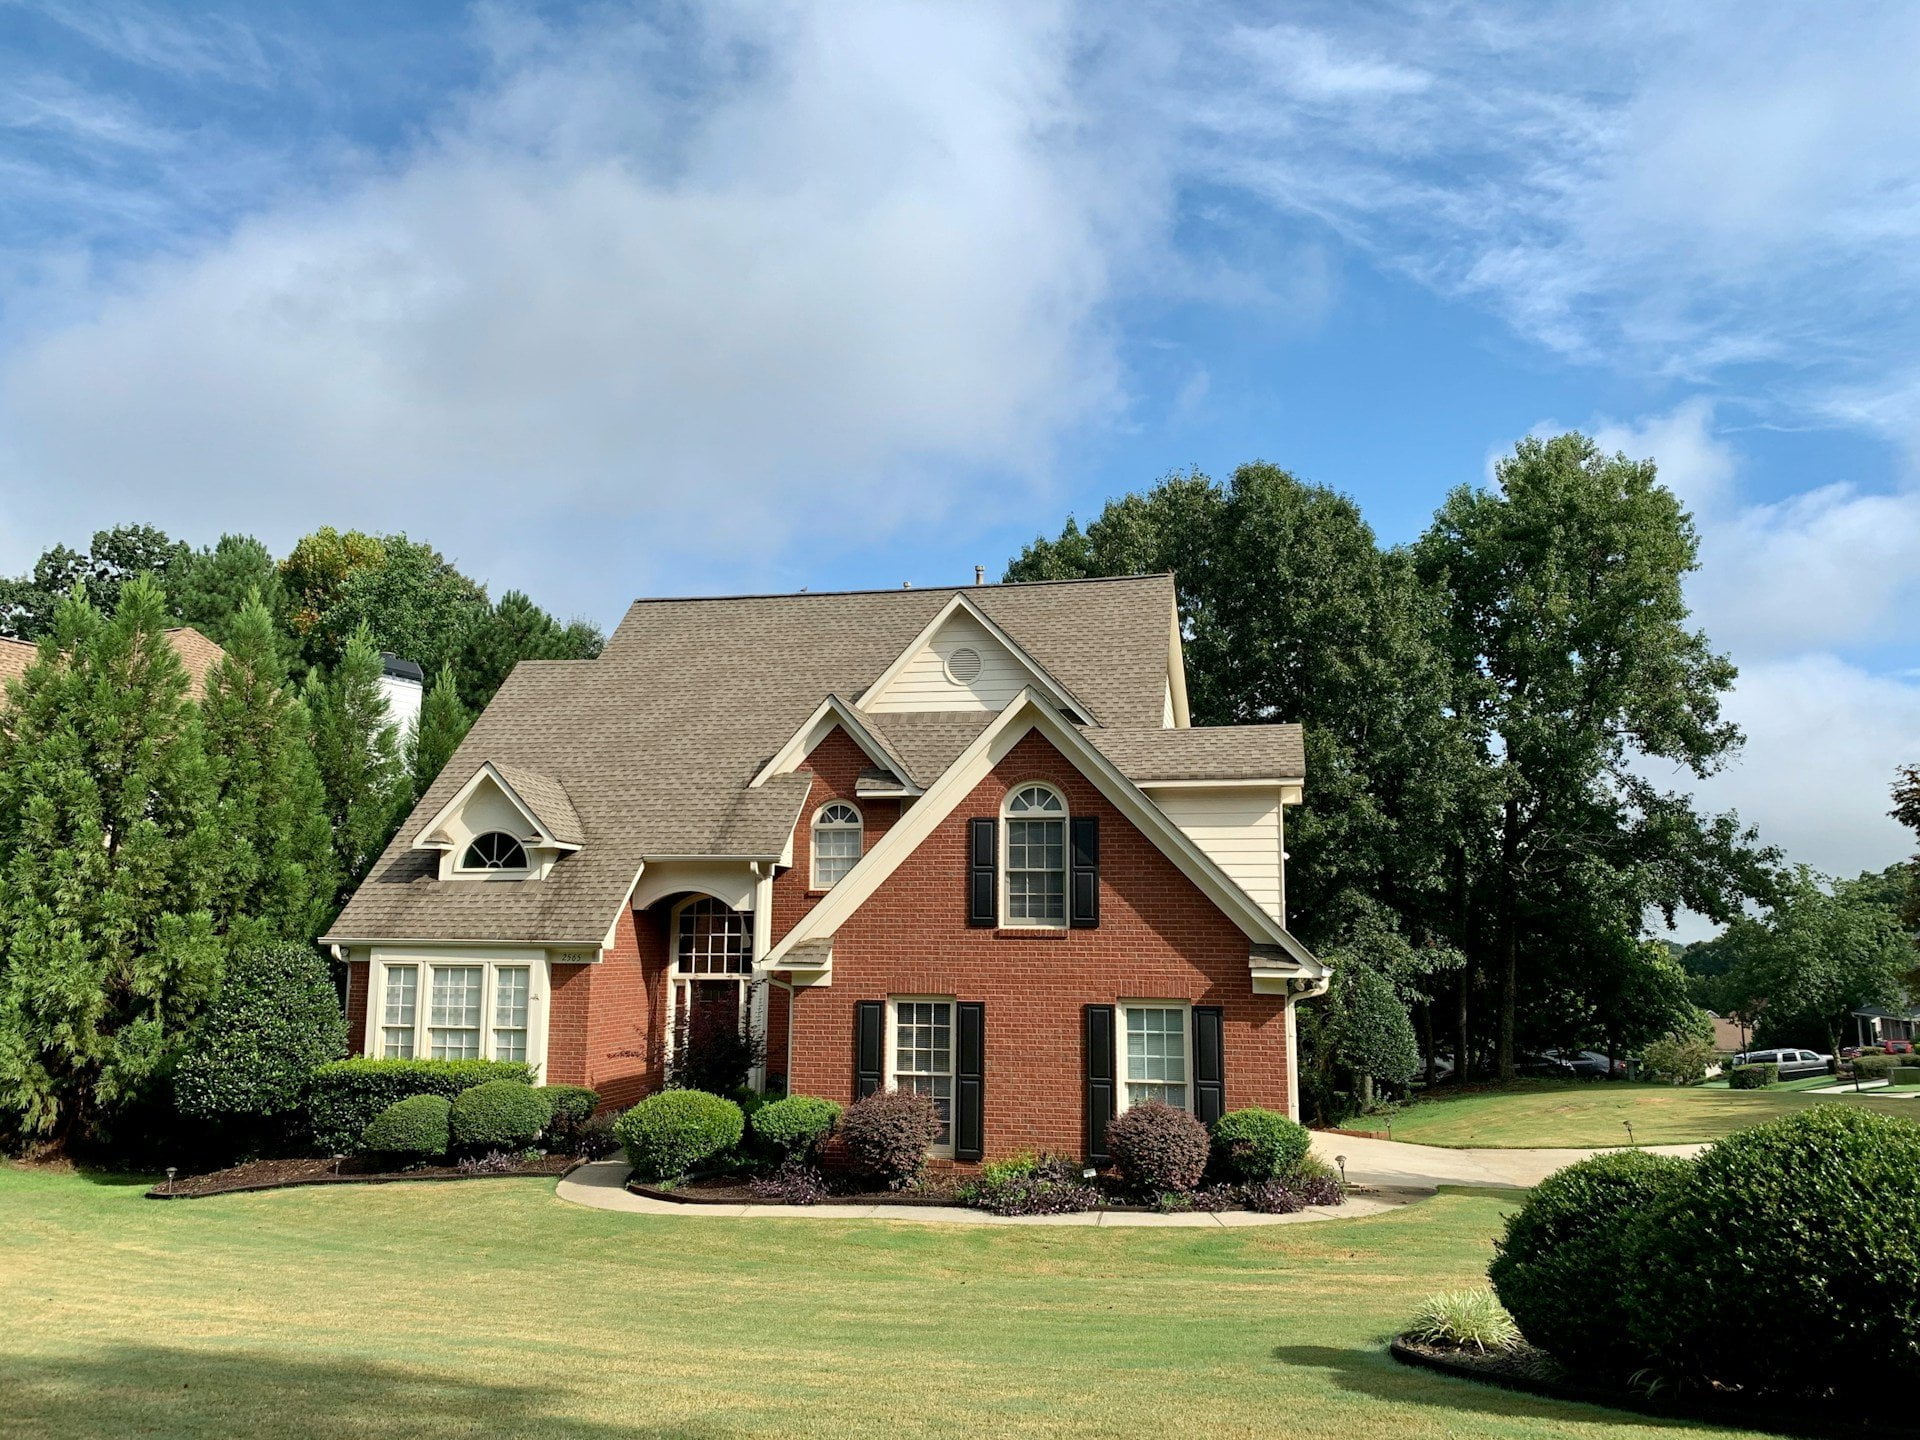 Embrace the Charlotte Lifestyle: Exclusive Homes for Sale through Kindred Realty